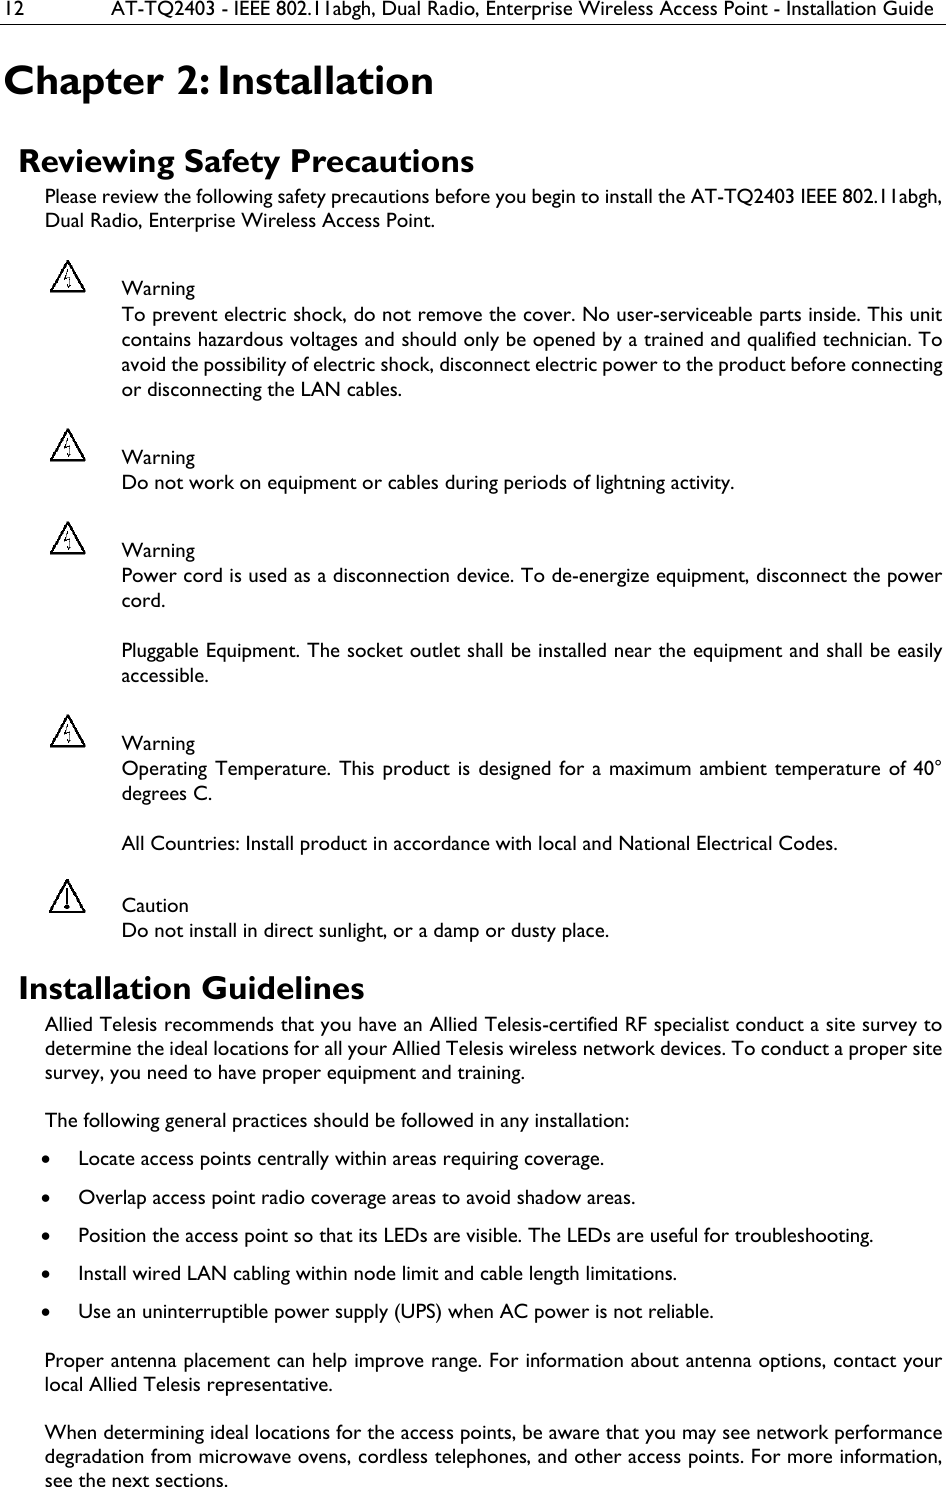 12  AT-TQ2403 - IEEE 802.11abgh, Dual Radio, Enterprise Wireless Access Point - Installation Guide Chapter 2: Installation Reviewing Safety Precautions Please review the following safety precautions before you begin to install the AT-TQ2403 IEEE 802.11abgh, Dual Radio, Enterprise Wireless Access Point.  Warning To prevent electric shock, do not remove the cover. No user-serviceable parts inside. This unit contains hazardous voltages and should only be opened by a trained and qualified technician. To avoid the possibility of electric shock, disconnect electric power to the product before connecting or disconnecting the LAN cables.  Warning Do not work on equipment or cables during periods of lightning activity.  Warning Power cord is used as a disconnection device. To de-energize equipment, disconnect the power cord.  Pluggable Equipment. The socket outlet shall be installed near the equipment and shall be easily accessible.  Warning Operating Temperature. This product is designed for a maximum ambient temperature of 40° degrees C.  All Countries: Install product in accordance with local and National Electrical Codes.  Caution Do not install in direct sunlight, or a damp or dusty place. Installation Guidelines Allied Telesis recommends that you have an Allied Telesis-certified RF specialist conduct a site survey to determine the ideal locations for all your Allied Telesis wireless network devices. To conduct a proper site survey, you need to have proper equipment and training.  The following general practices should be followed in any installation: • Locate access points centrally within areas requiring coverage. • Overlap access point radio coverage areas to avoid shadow areas. • Position the access point so that its LEDs are visible. The LEDs are useful for troubleshooting. • Install wired LAN cabling within node limit and cable length limitations. • Use an uninterruptible power supply (UPS) when AC power is not reliable.   Proper antenna placement can help improve range. For information about antenna options, contact your local Allied Telesis representative.   When determining ideal locations for the access points, be aware that you may see network performance degradation from microwave ovens, cordless telephones, and other access points. For more information, see the next sections. 